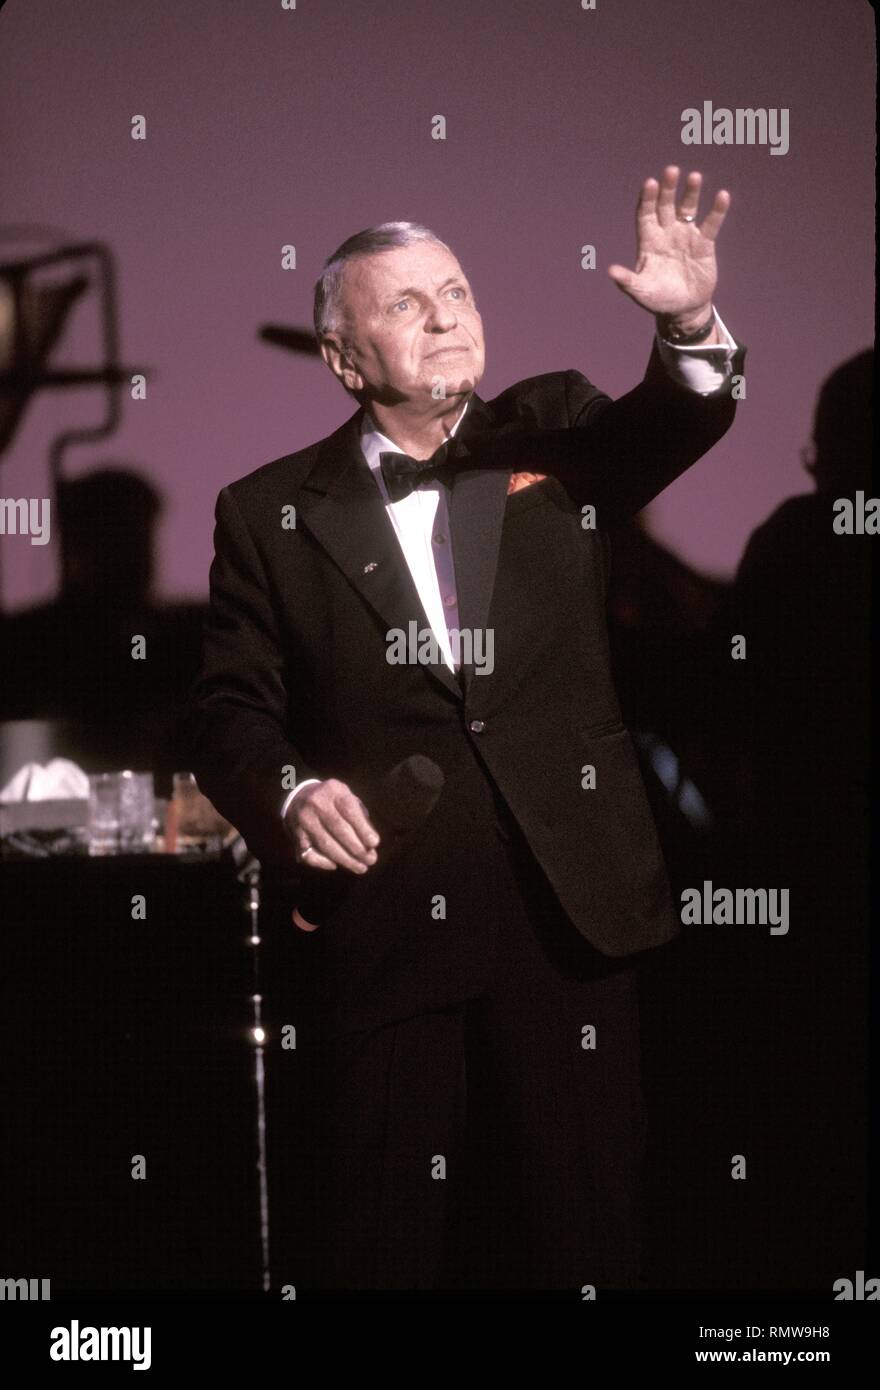 Singer and actor Frank Sinatra is shown performing on stage during a 'live' concert appearance. Stock Photo